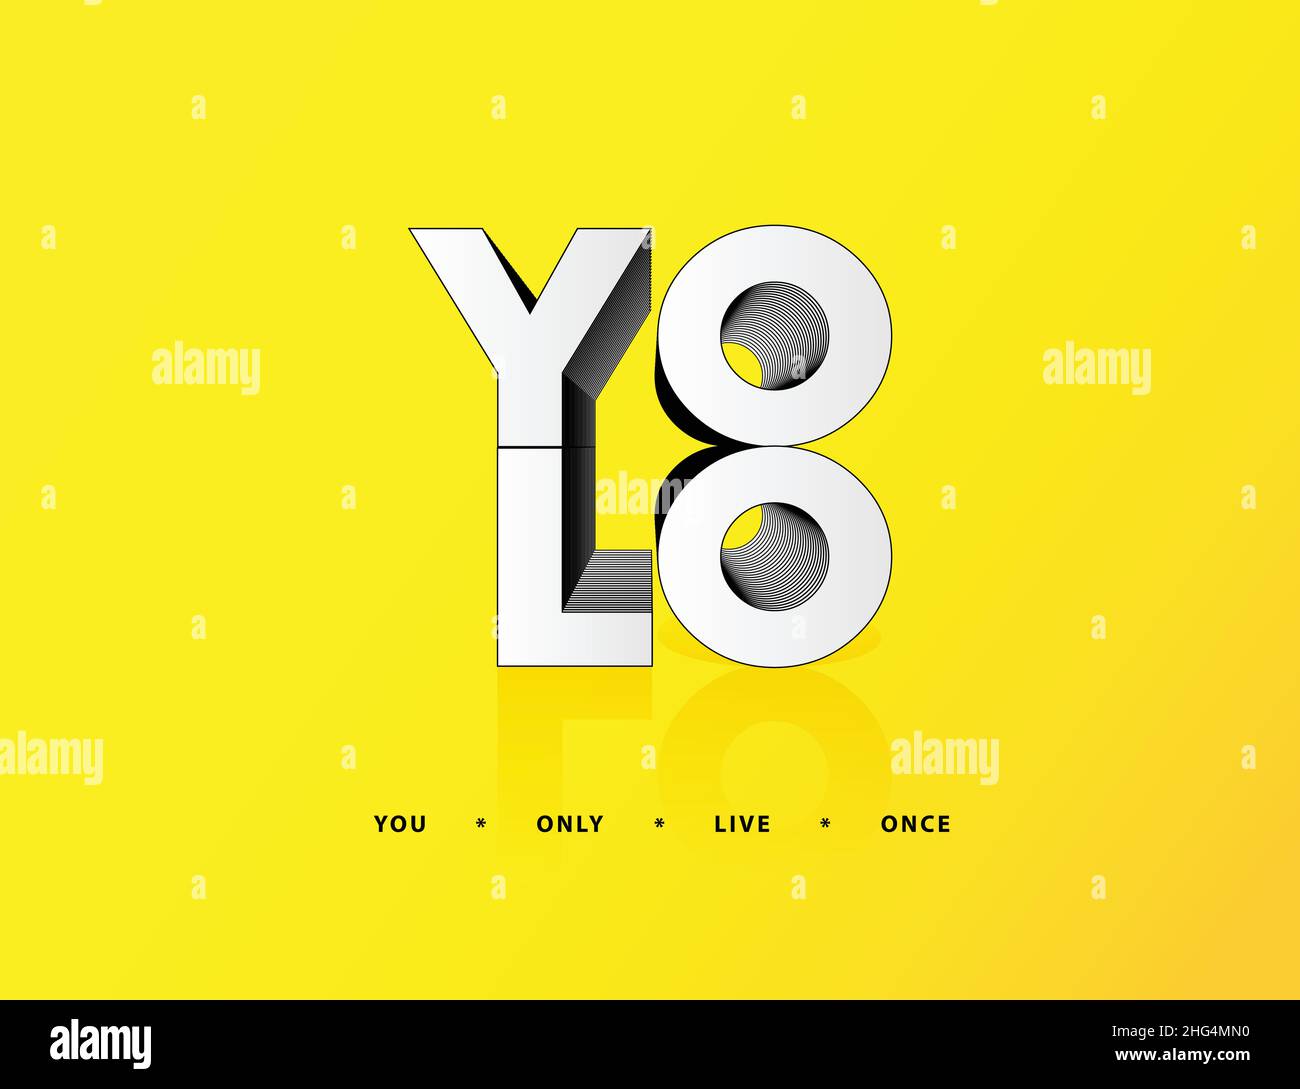 YOLO You Only Live Once Bright Sketch Phrase Youth Tagline Motto Poster Minimal Background Card flyer Stock Vector